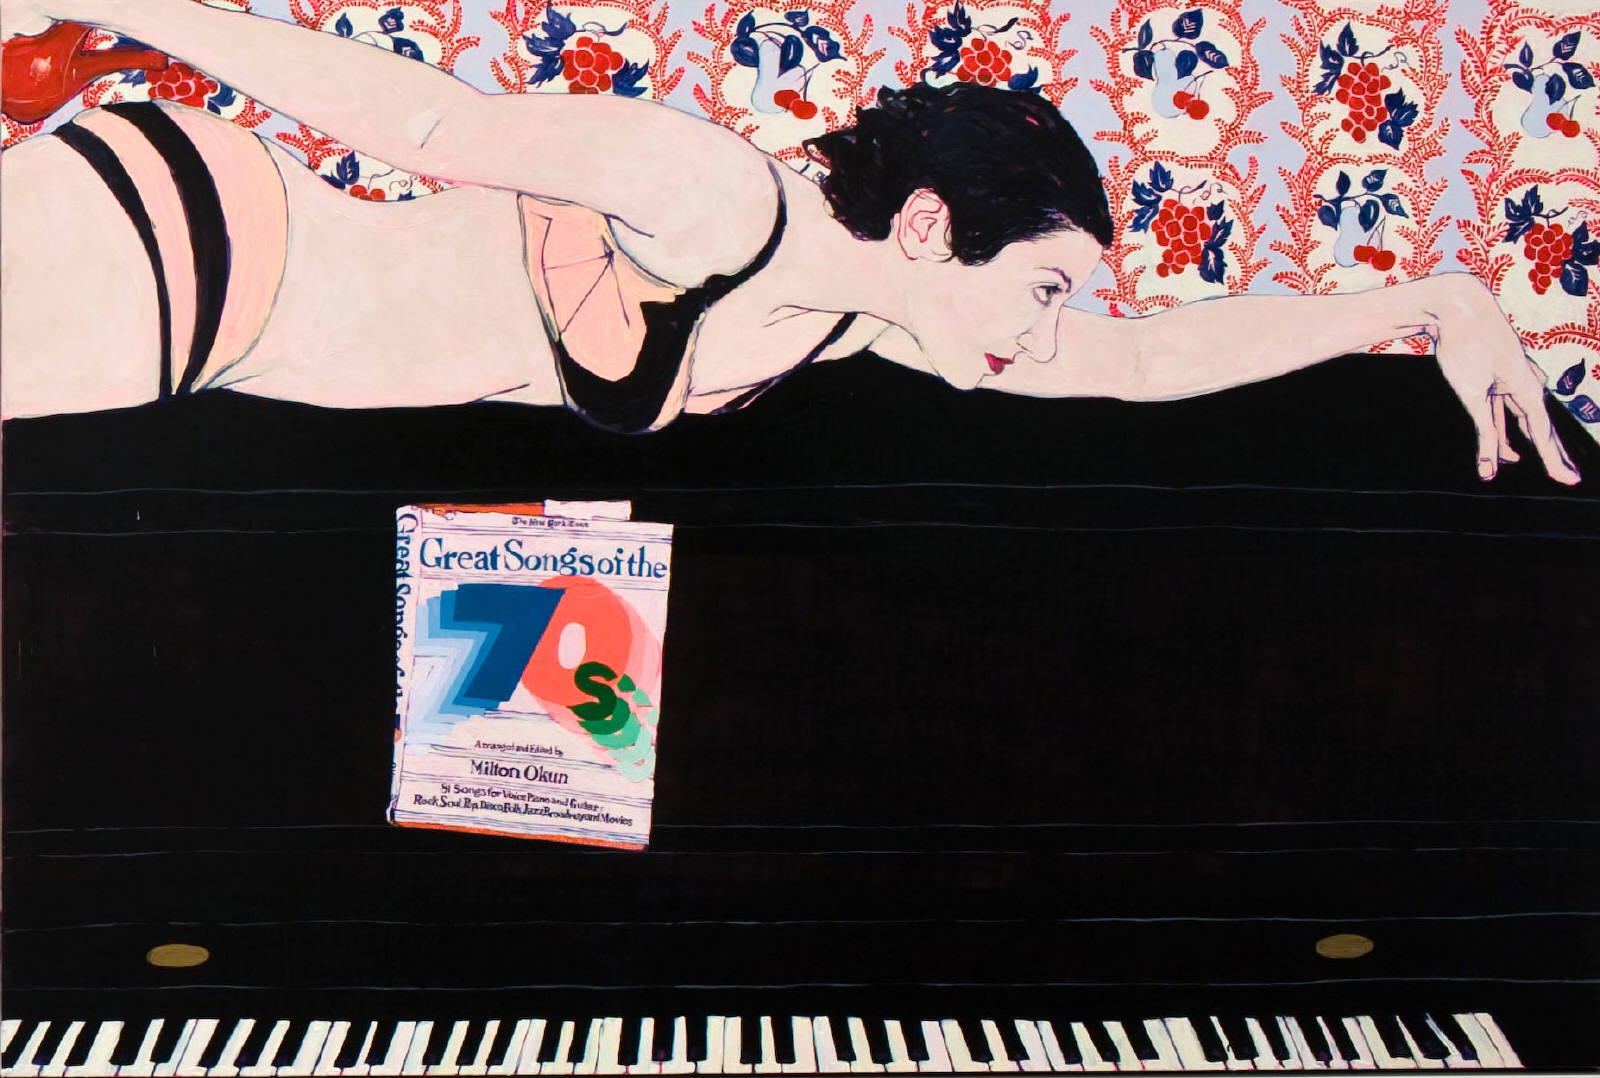 Great Songs of the 70s - Painting by Hope Gangloff